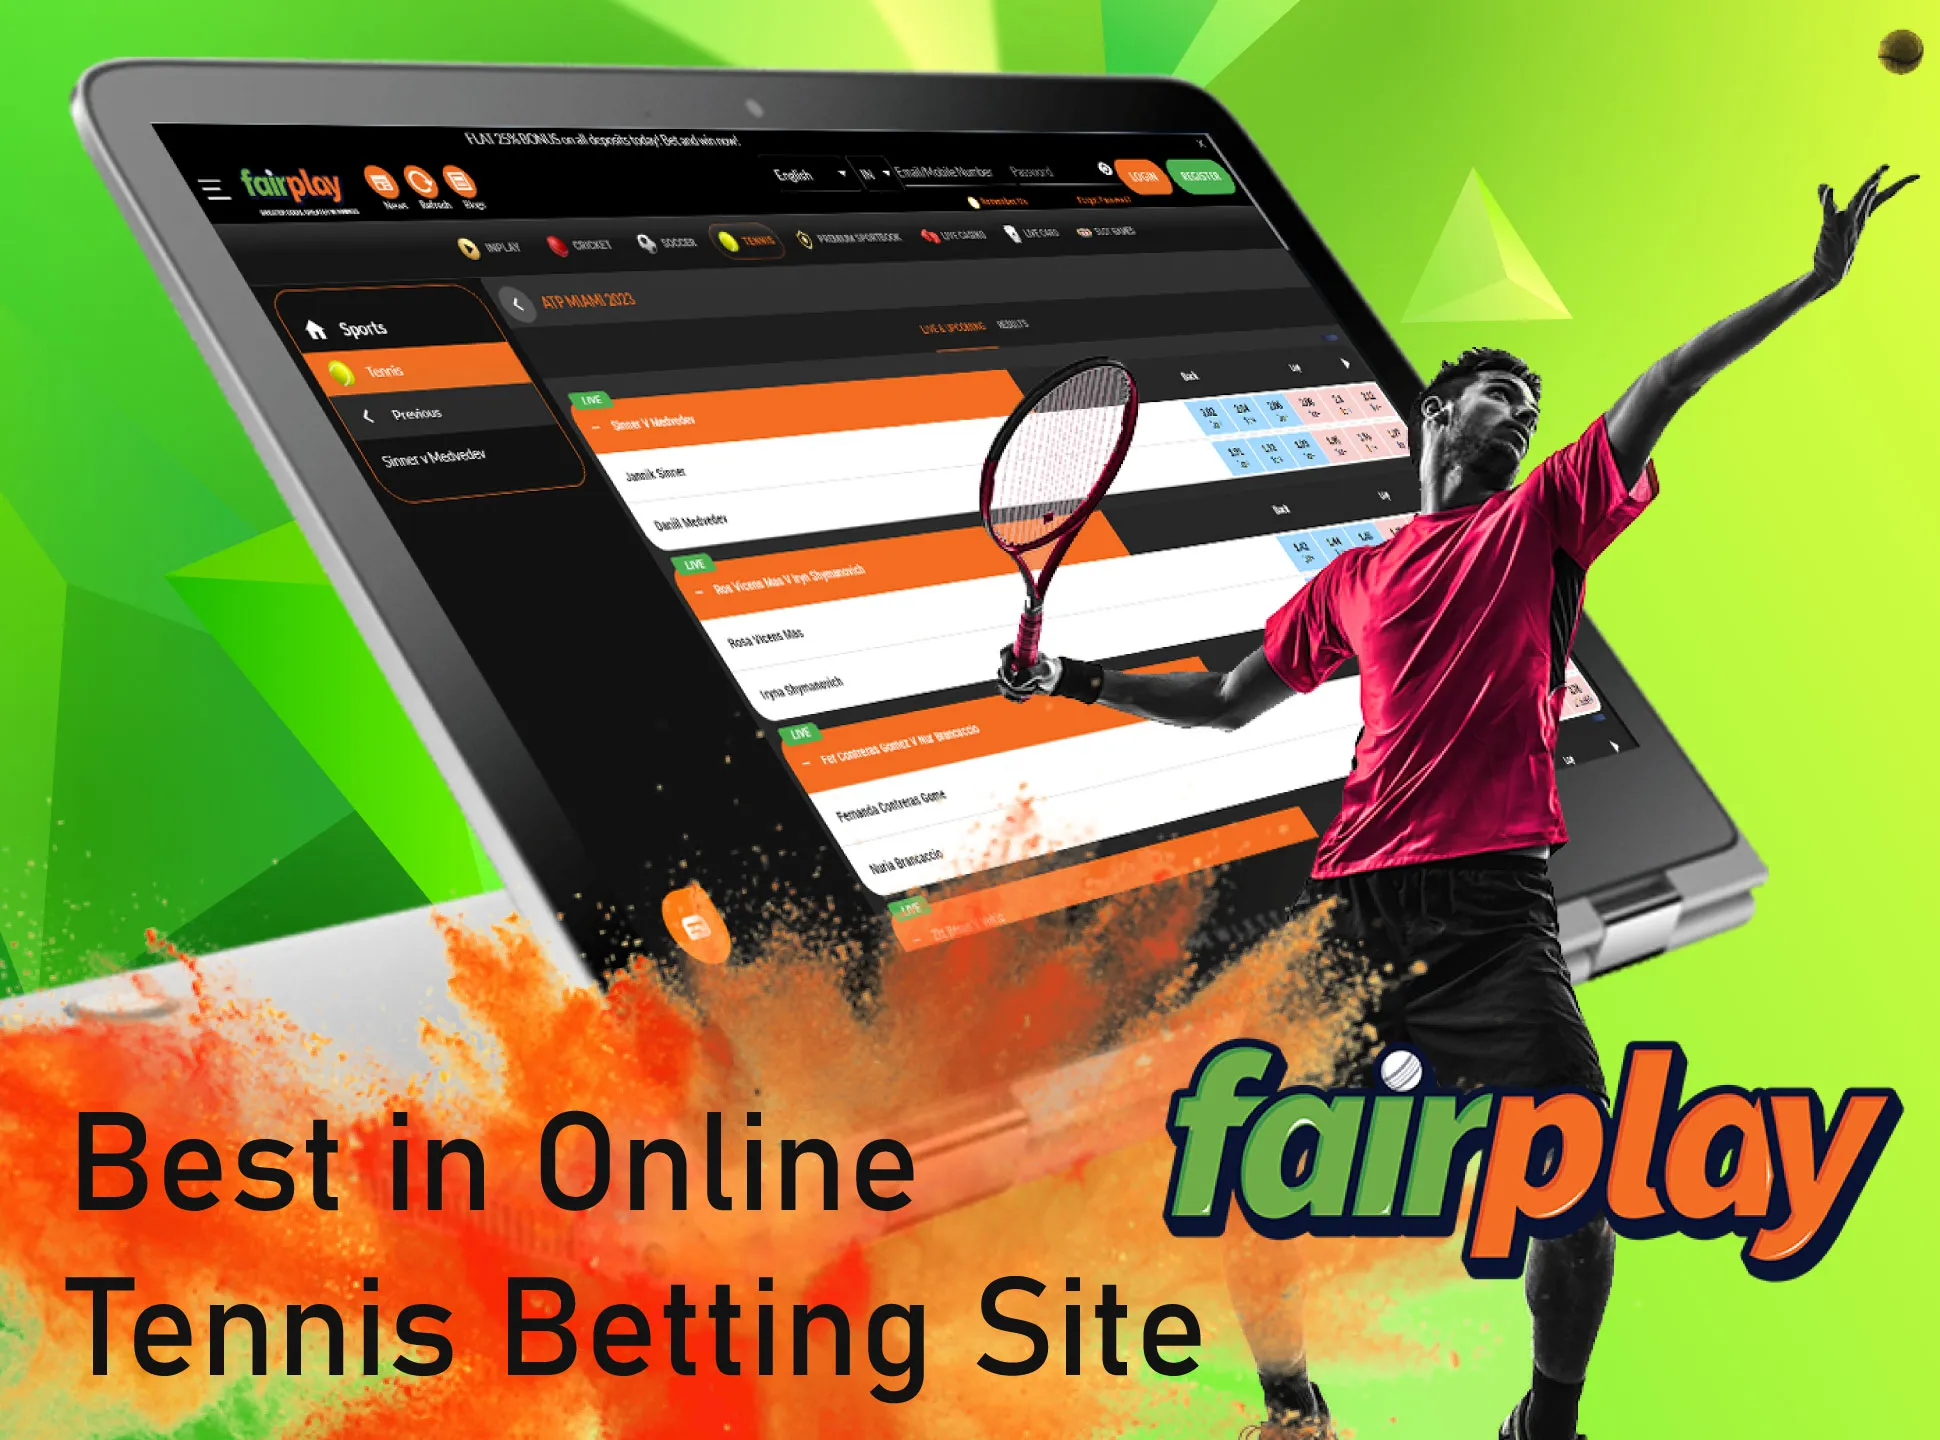 You can find a lot of popular tennis leagues and championship on the Fairplay website.